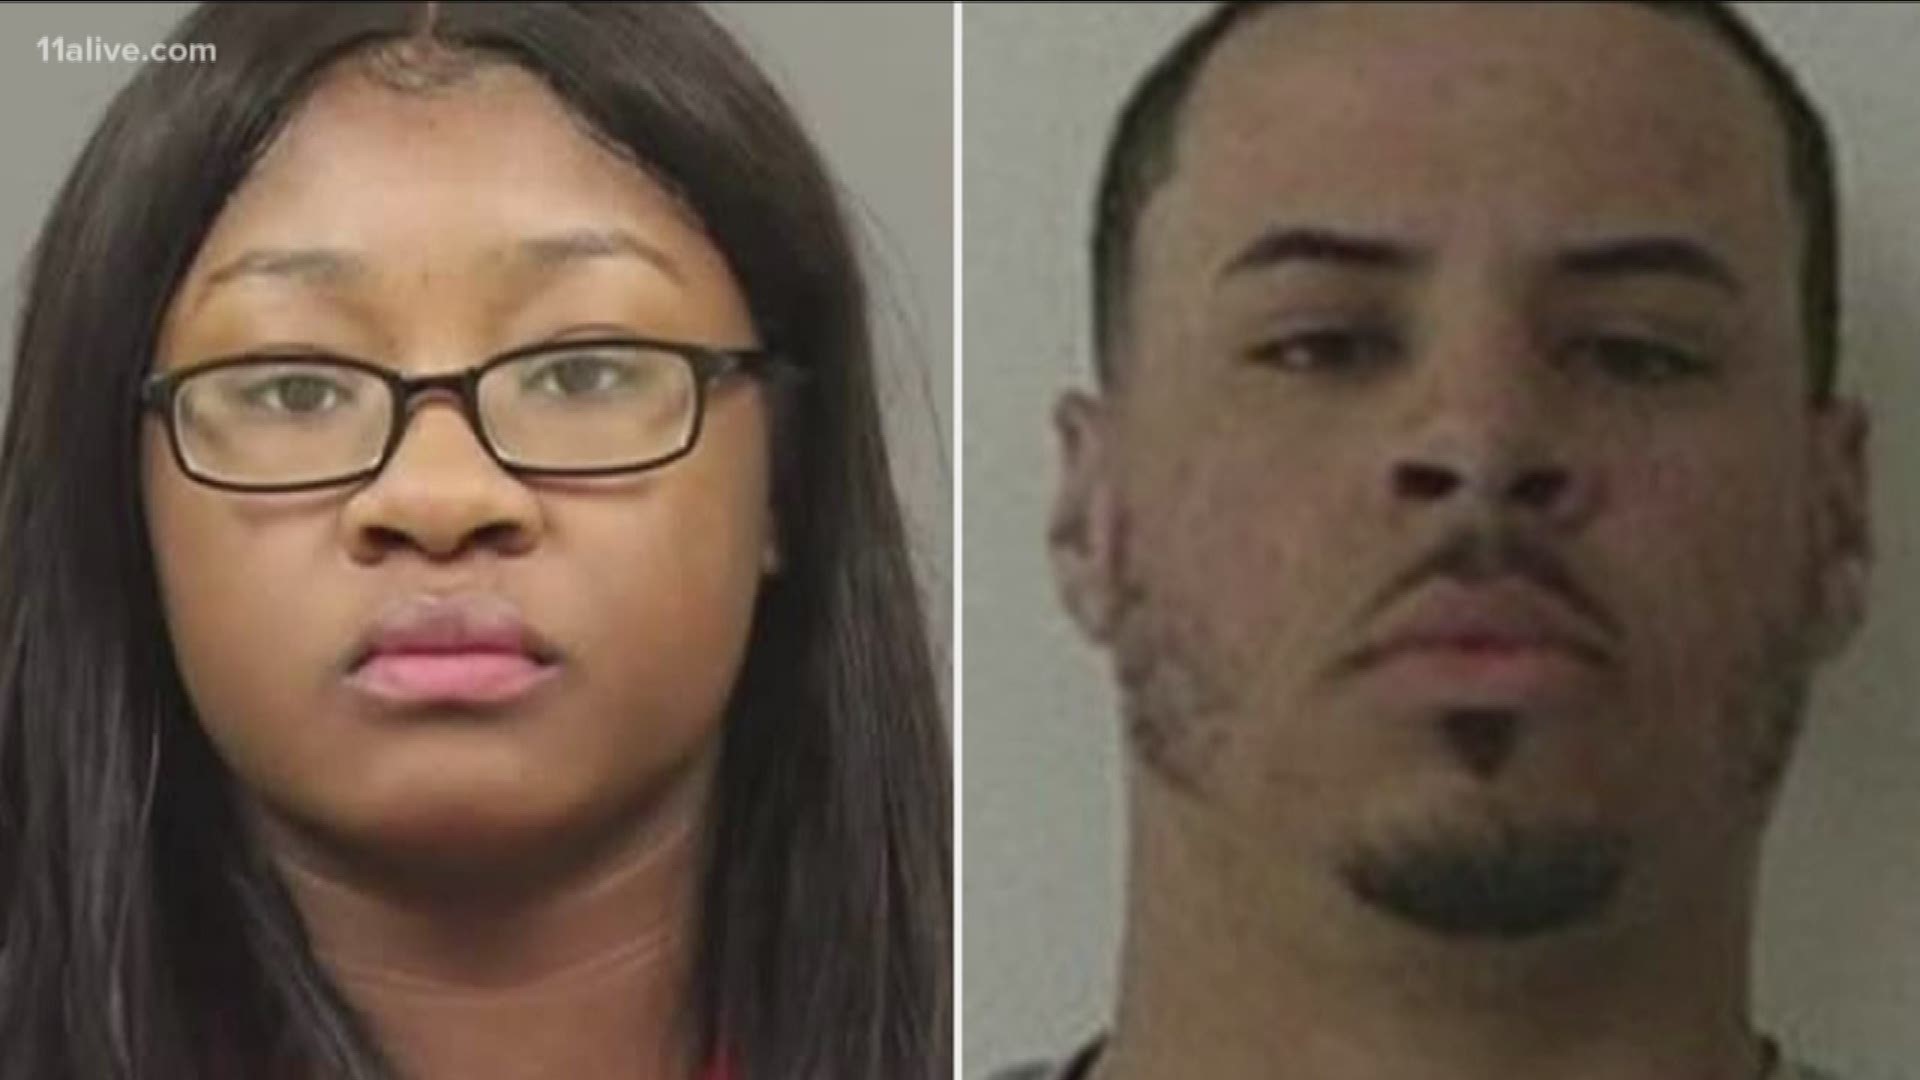 A woman and her boyfriend were deployed with the U.S. Army in South Korea when they conspired via Snapchat to kill her husband so she could claim the life insurance money, police in Michigan said.